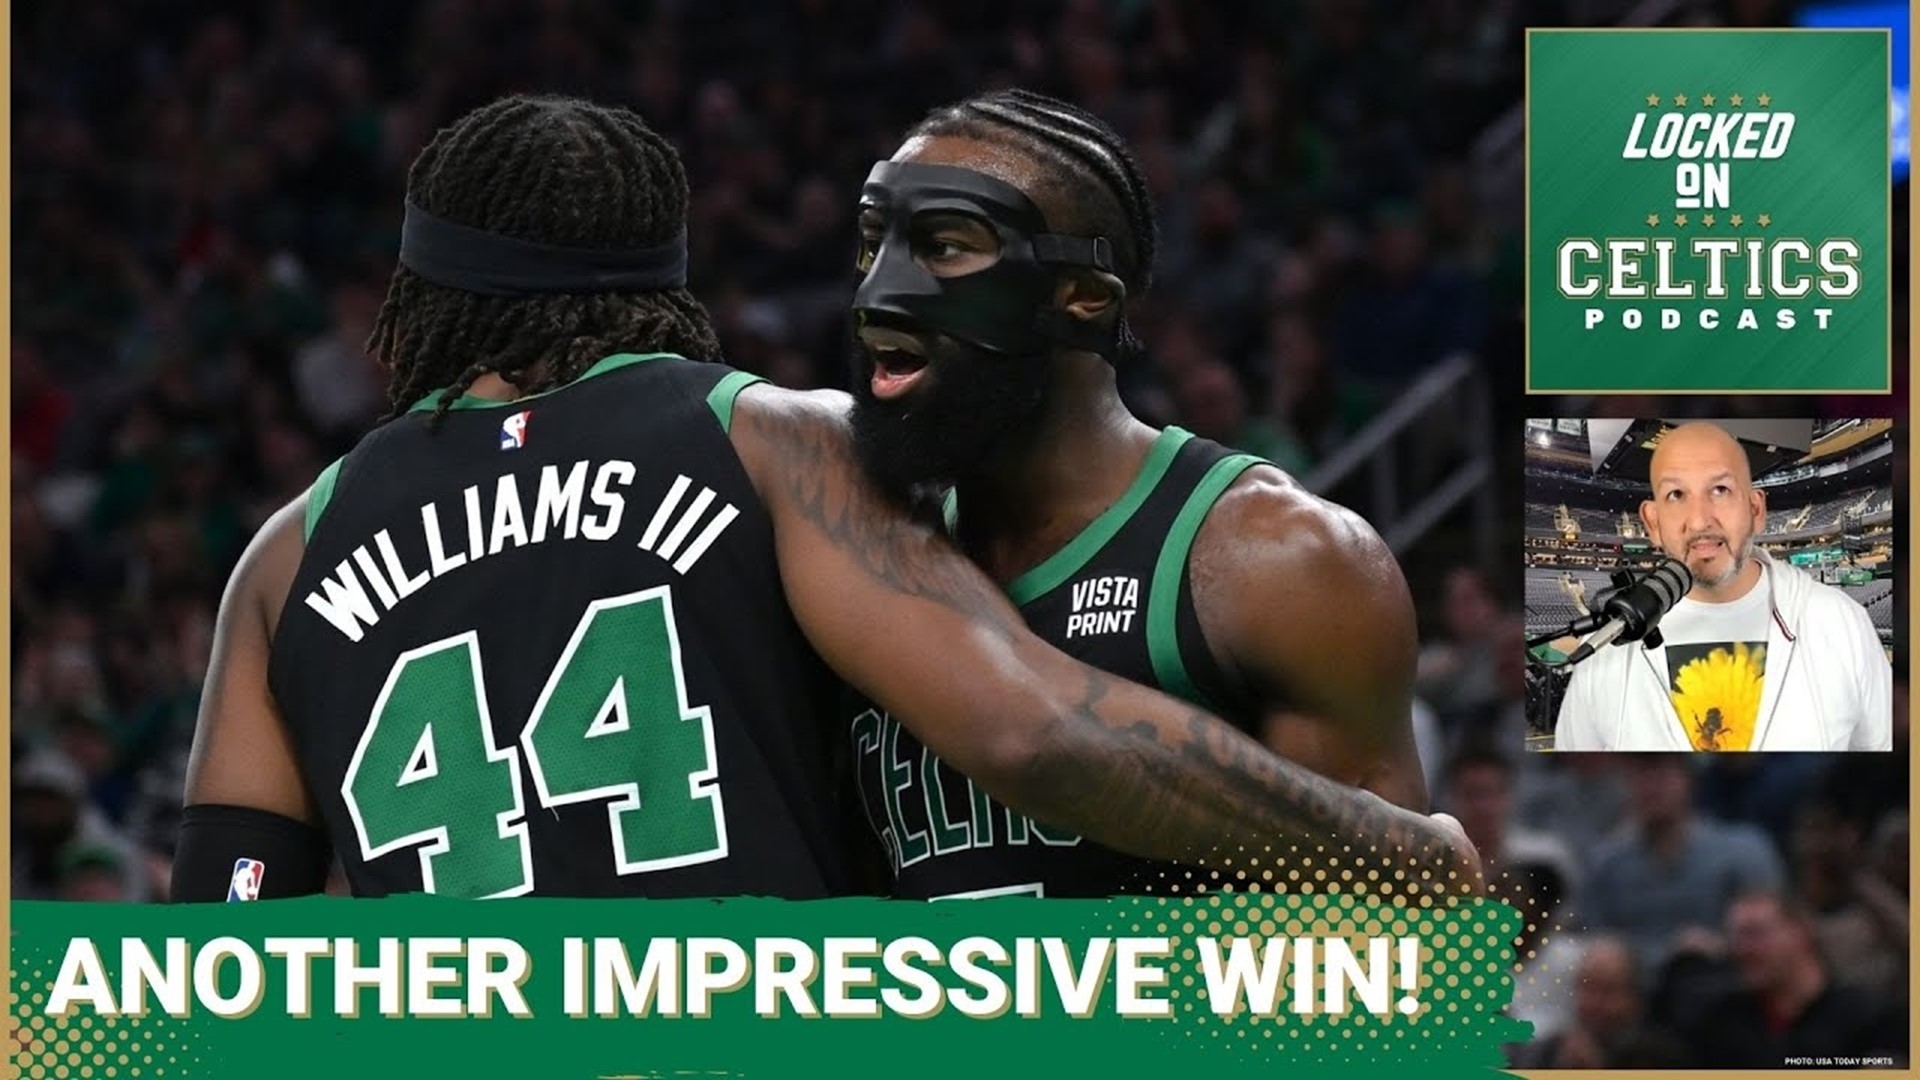 Boston Celtics pick up another impressive win by blowing out Indiana Pacers